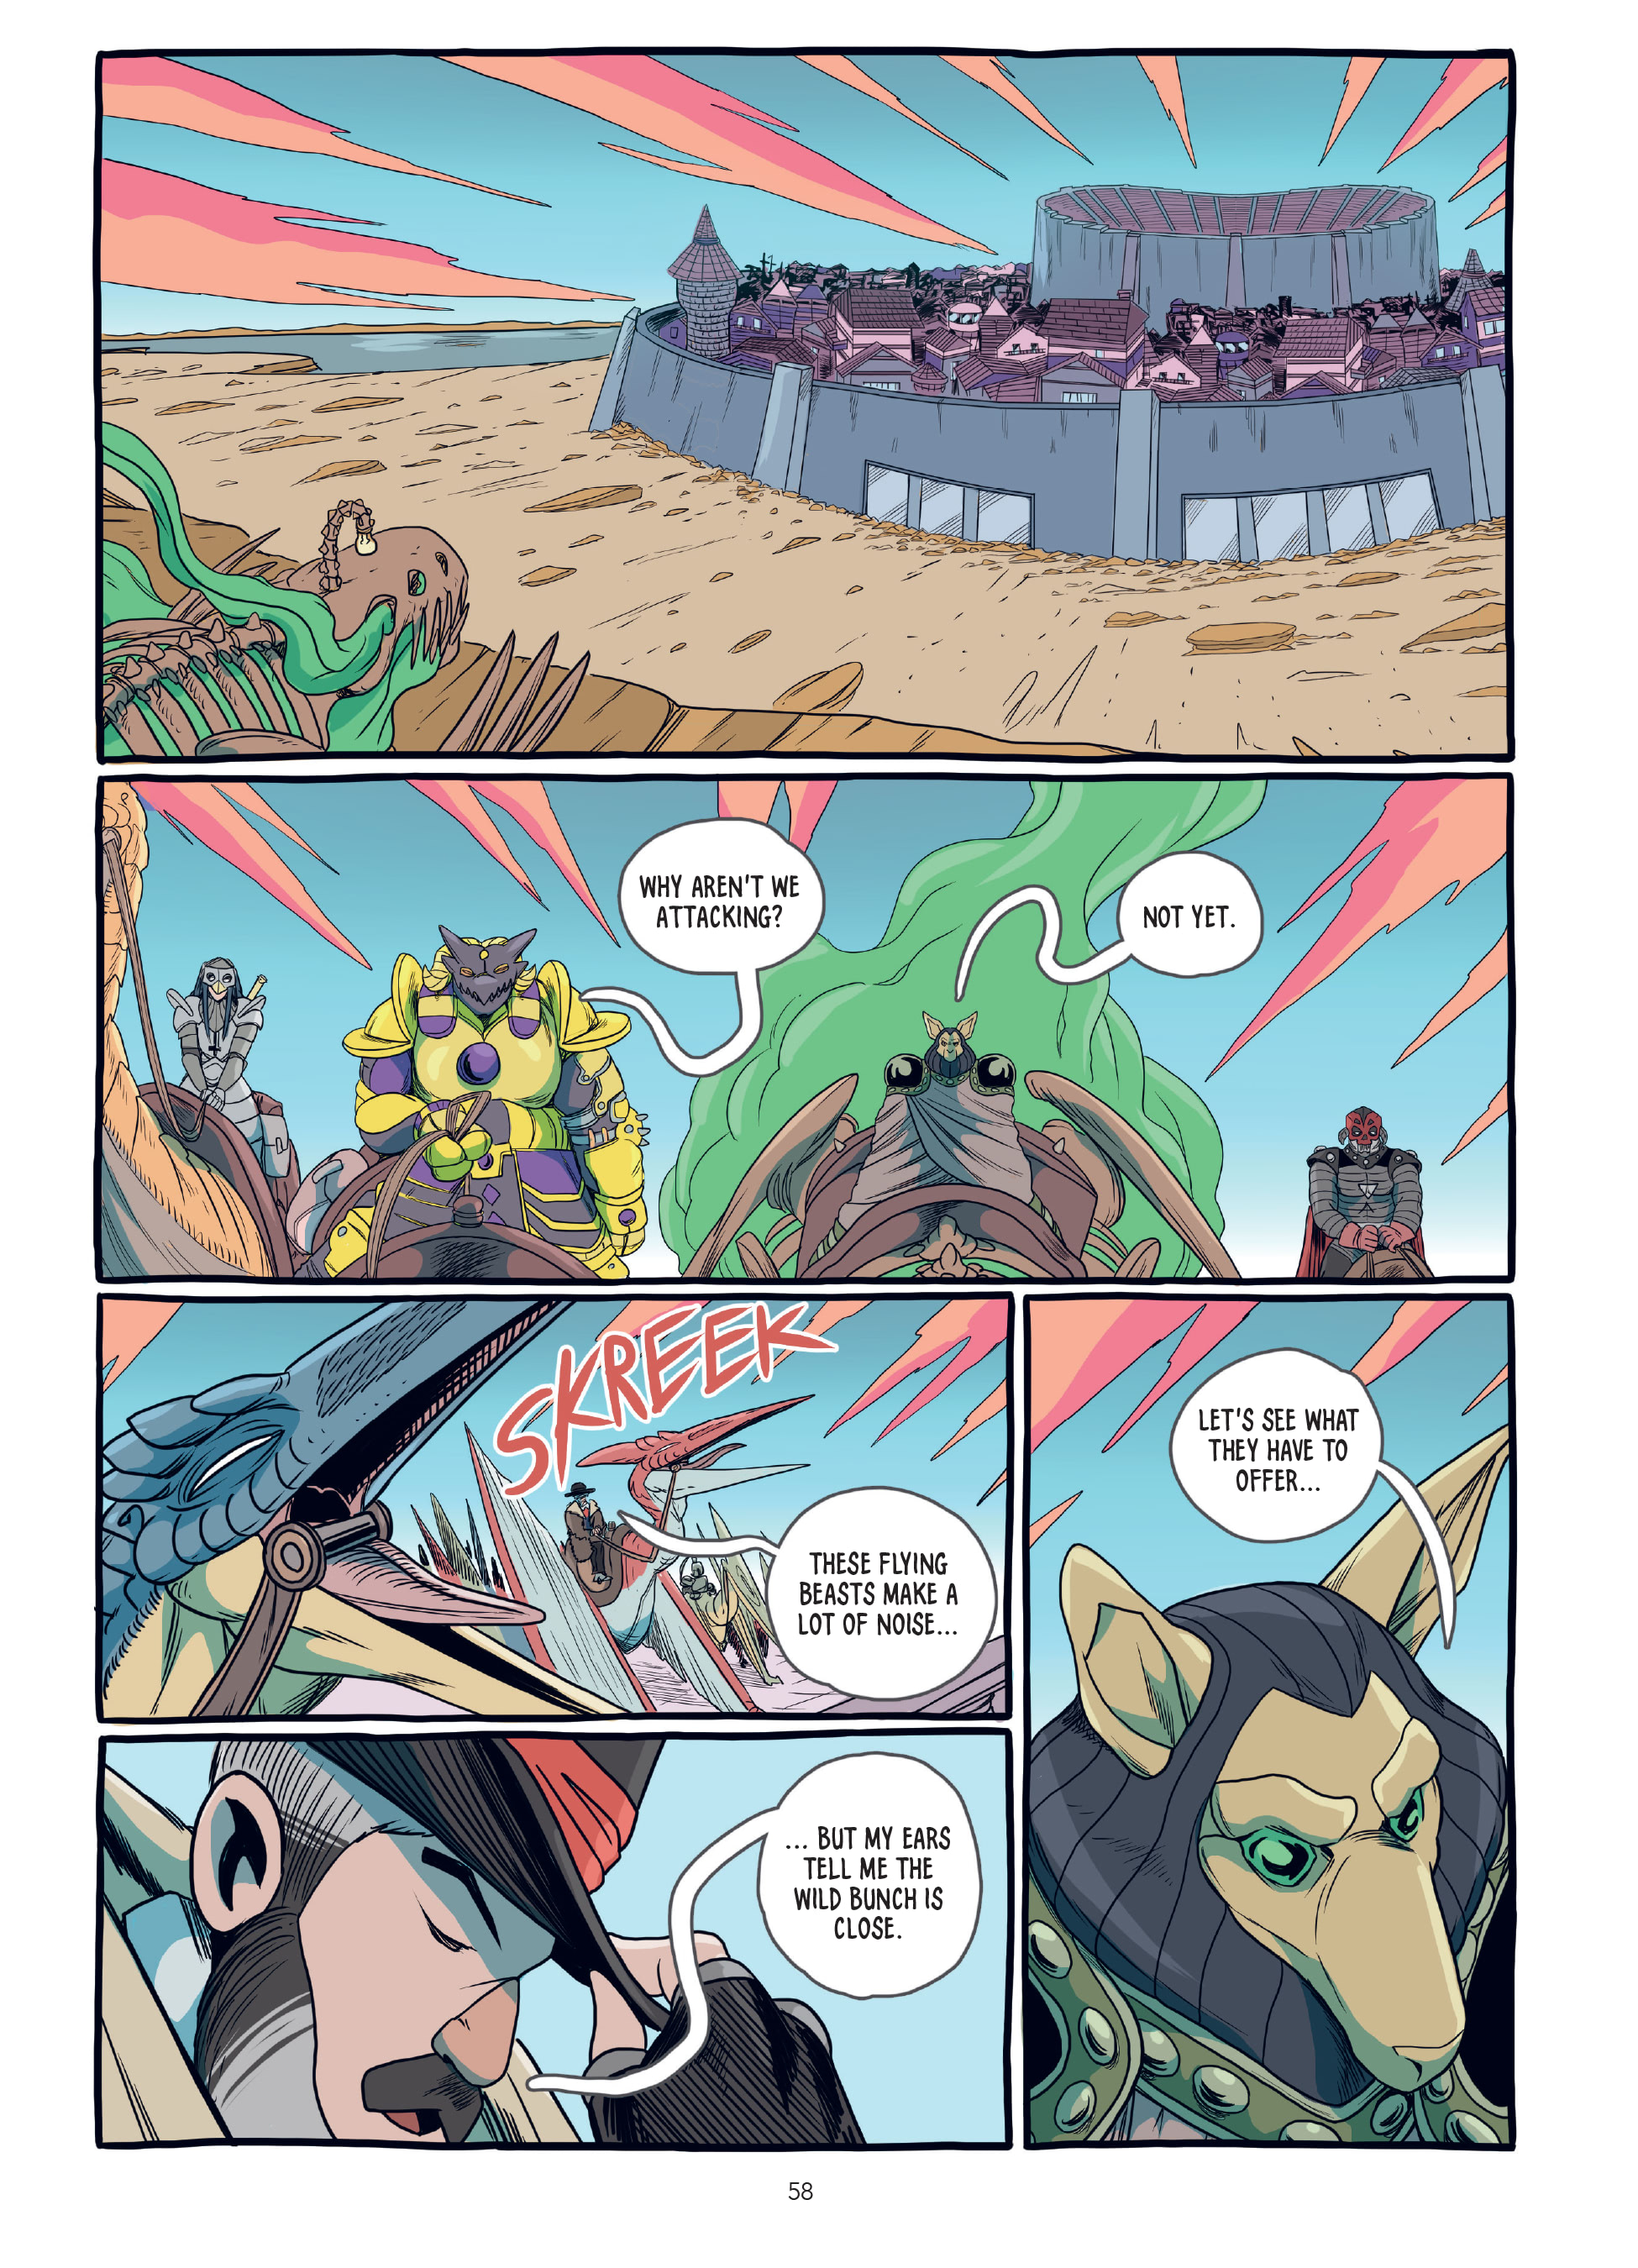 Gunland (2020-): Chapter 10 - Page 5